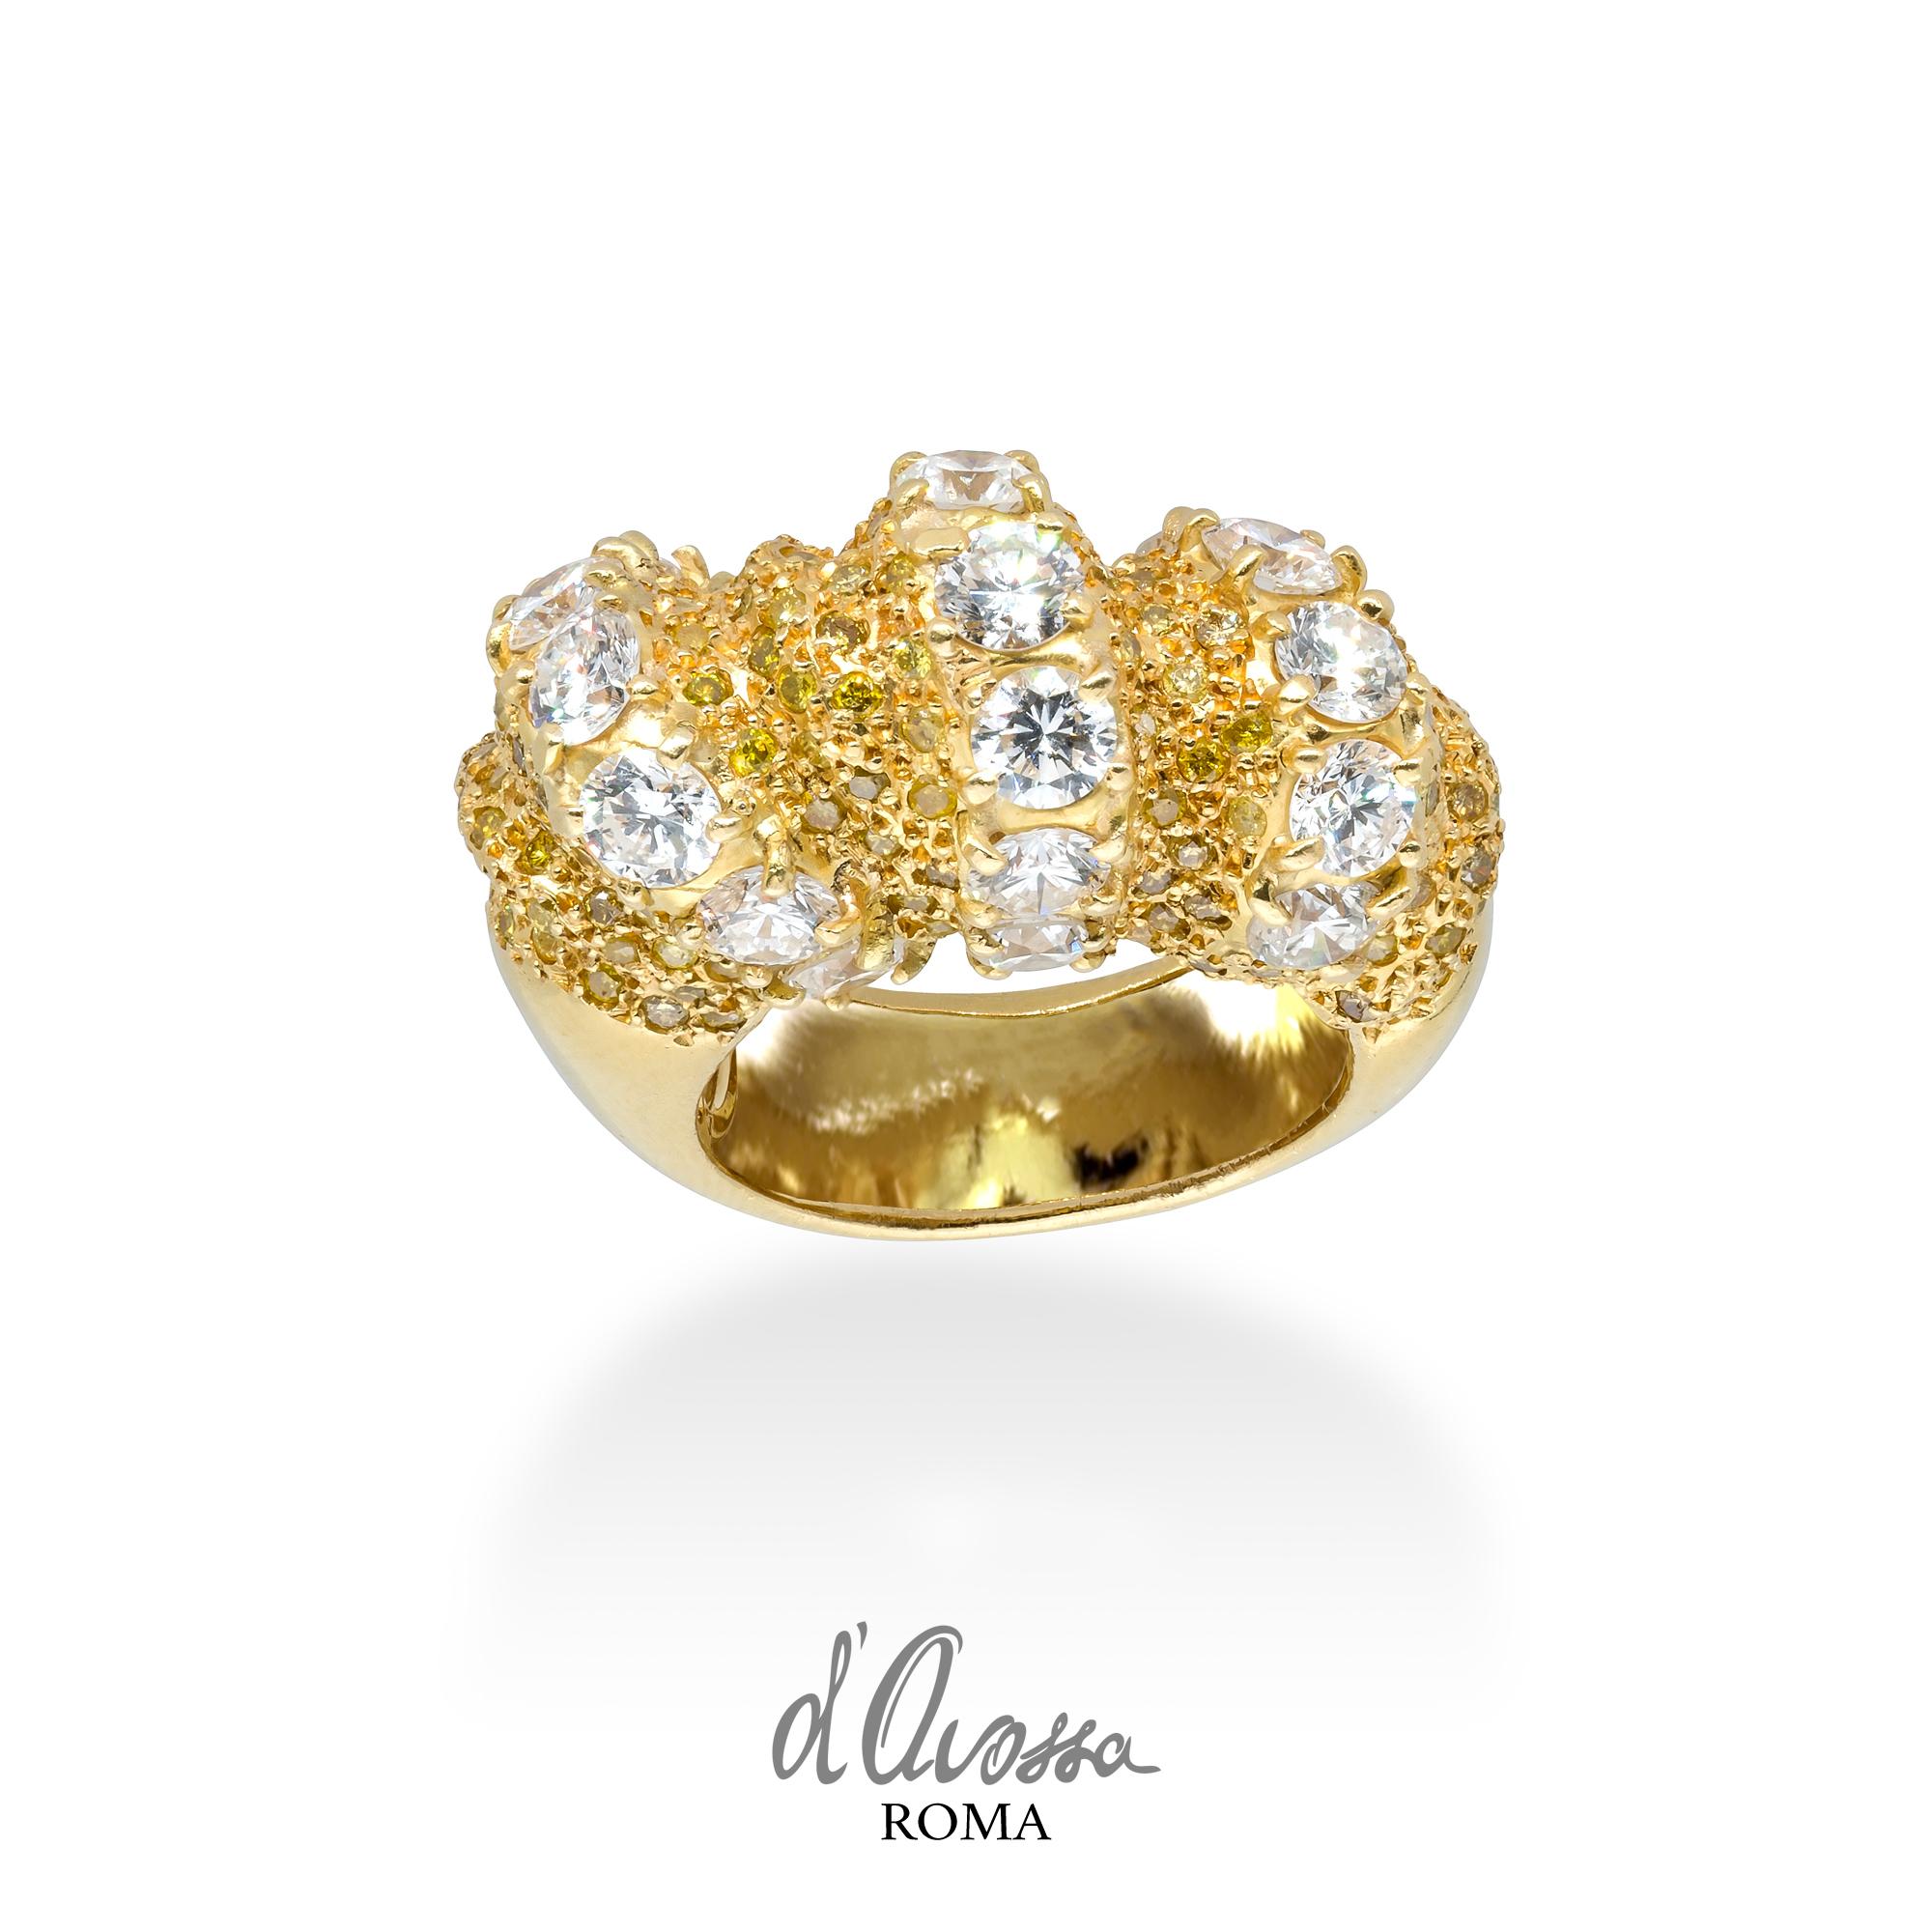 A d'Avossa Unique Ring made in yellow gold with a  fancy yellow diamonds pavé of 1.90 cts and three rows of white diamonds, G color, VVS1, cts  3.61
Unique, hand made Piece
Ref. ABT279